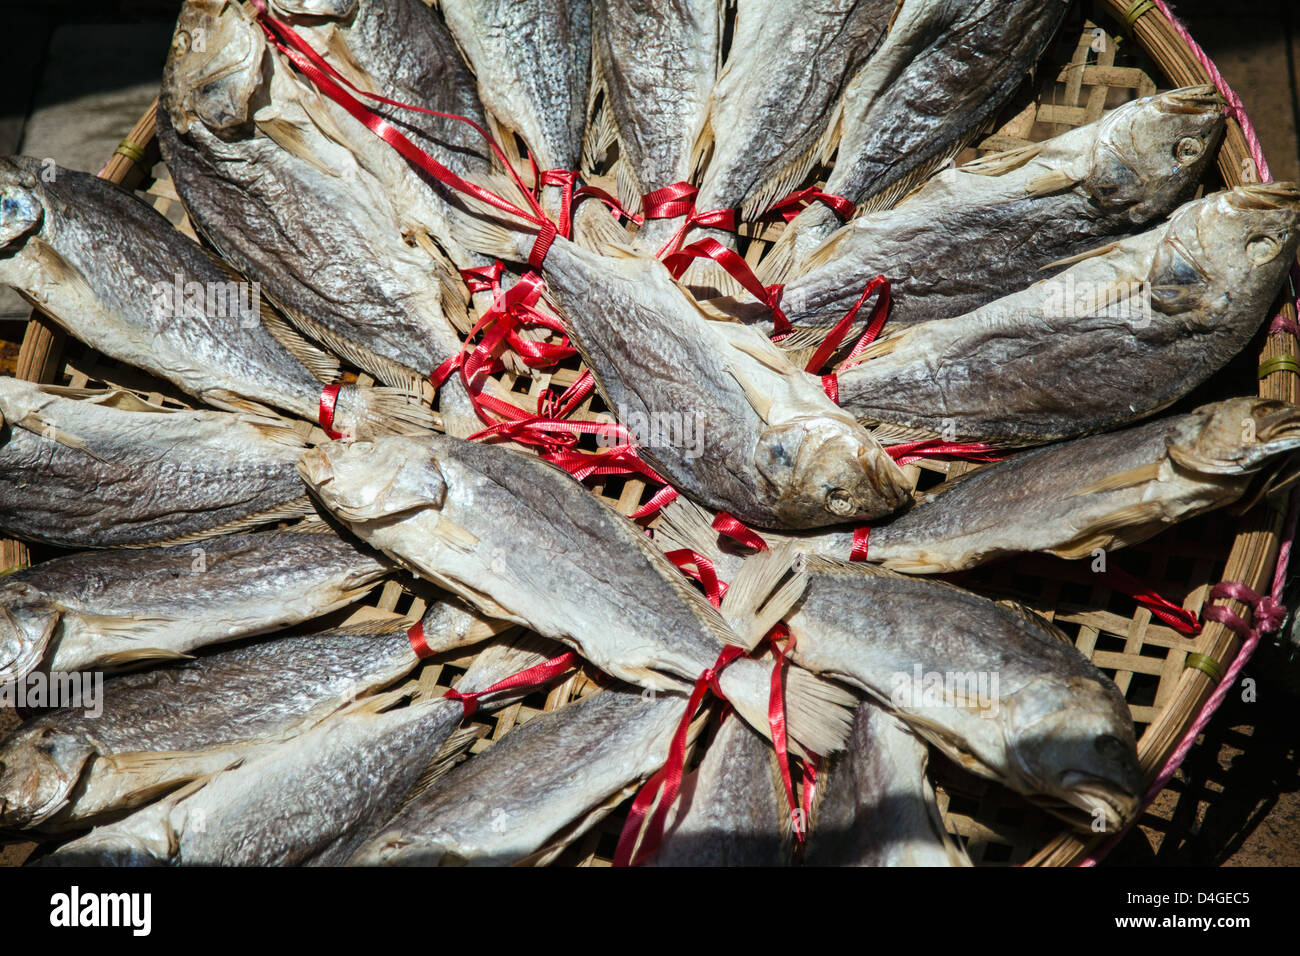 Dried fish on Dried Seafood Street in Hong Kong Stock Photo